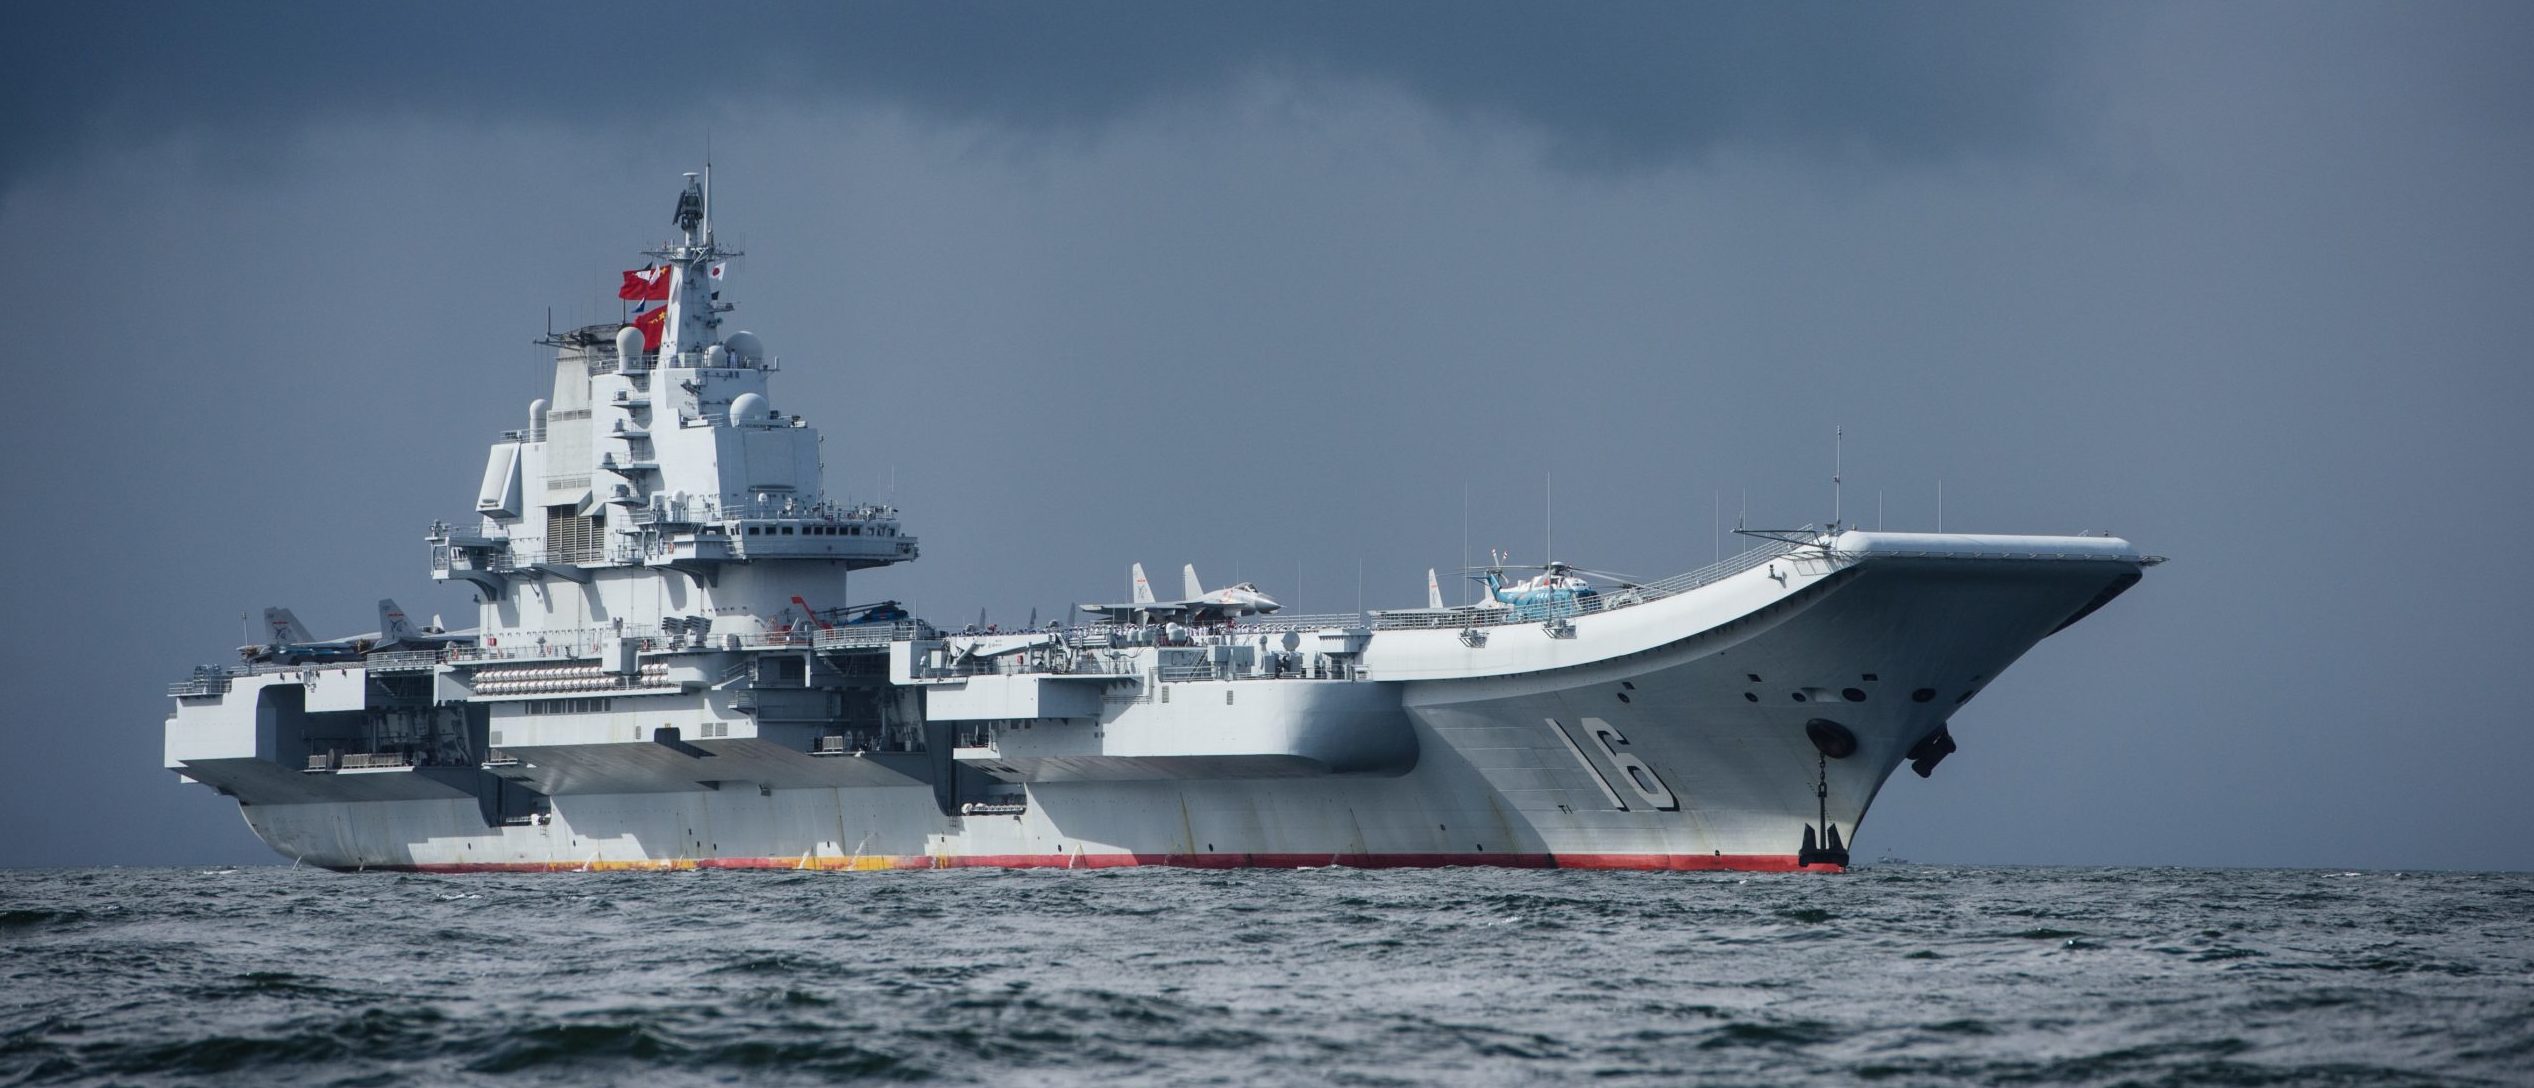 China's aircraft carrier Liaoning arriving in Hong Kong for the first time. (ANTHONY WALLACE/AFP via Getty Images)